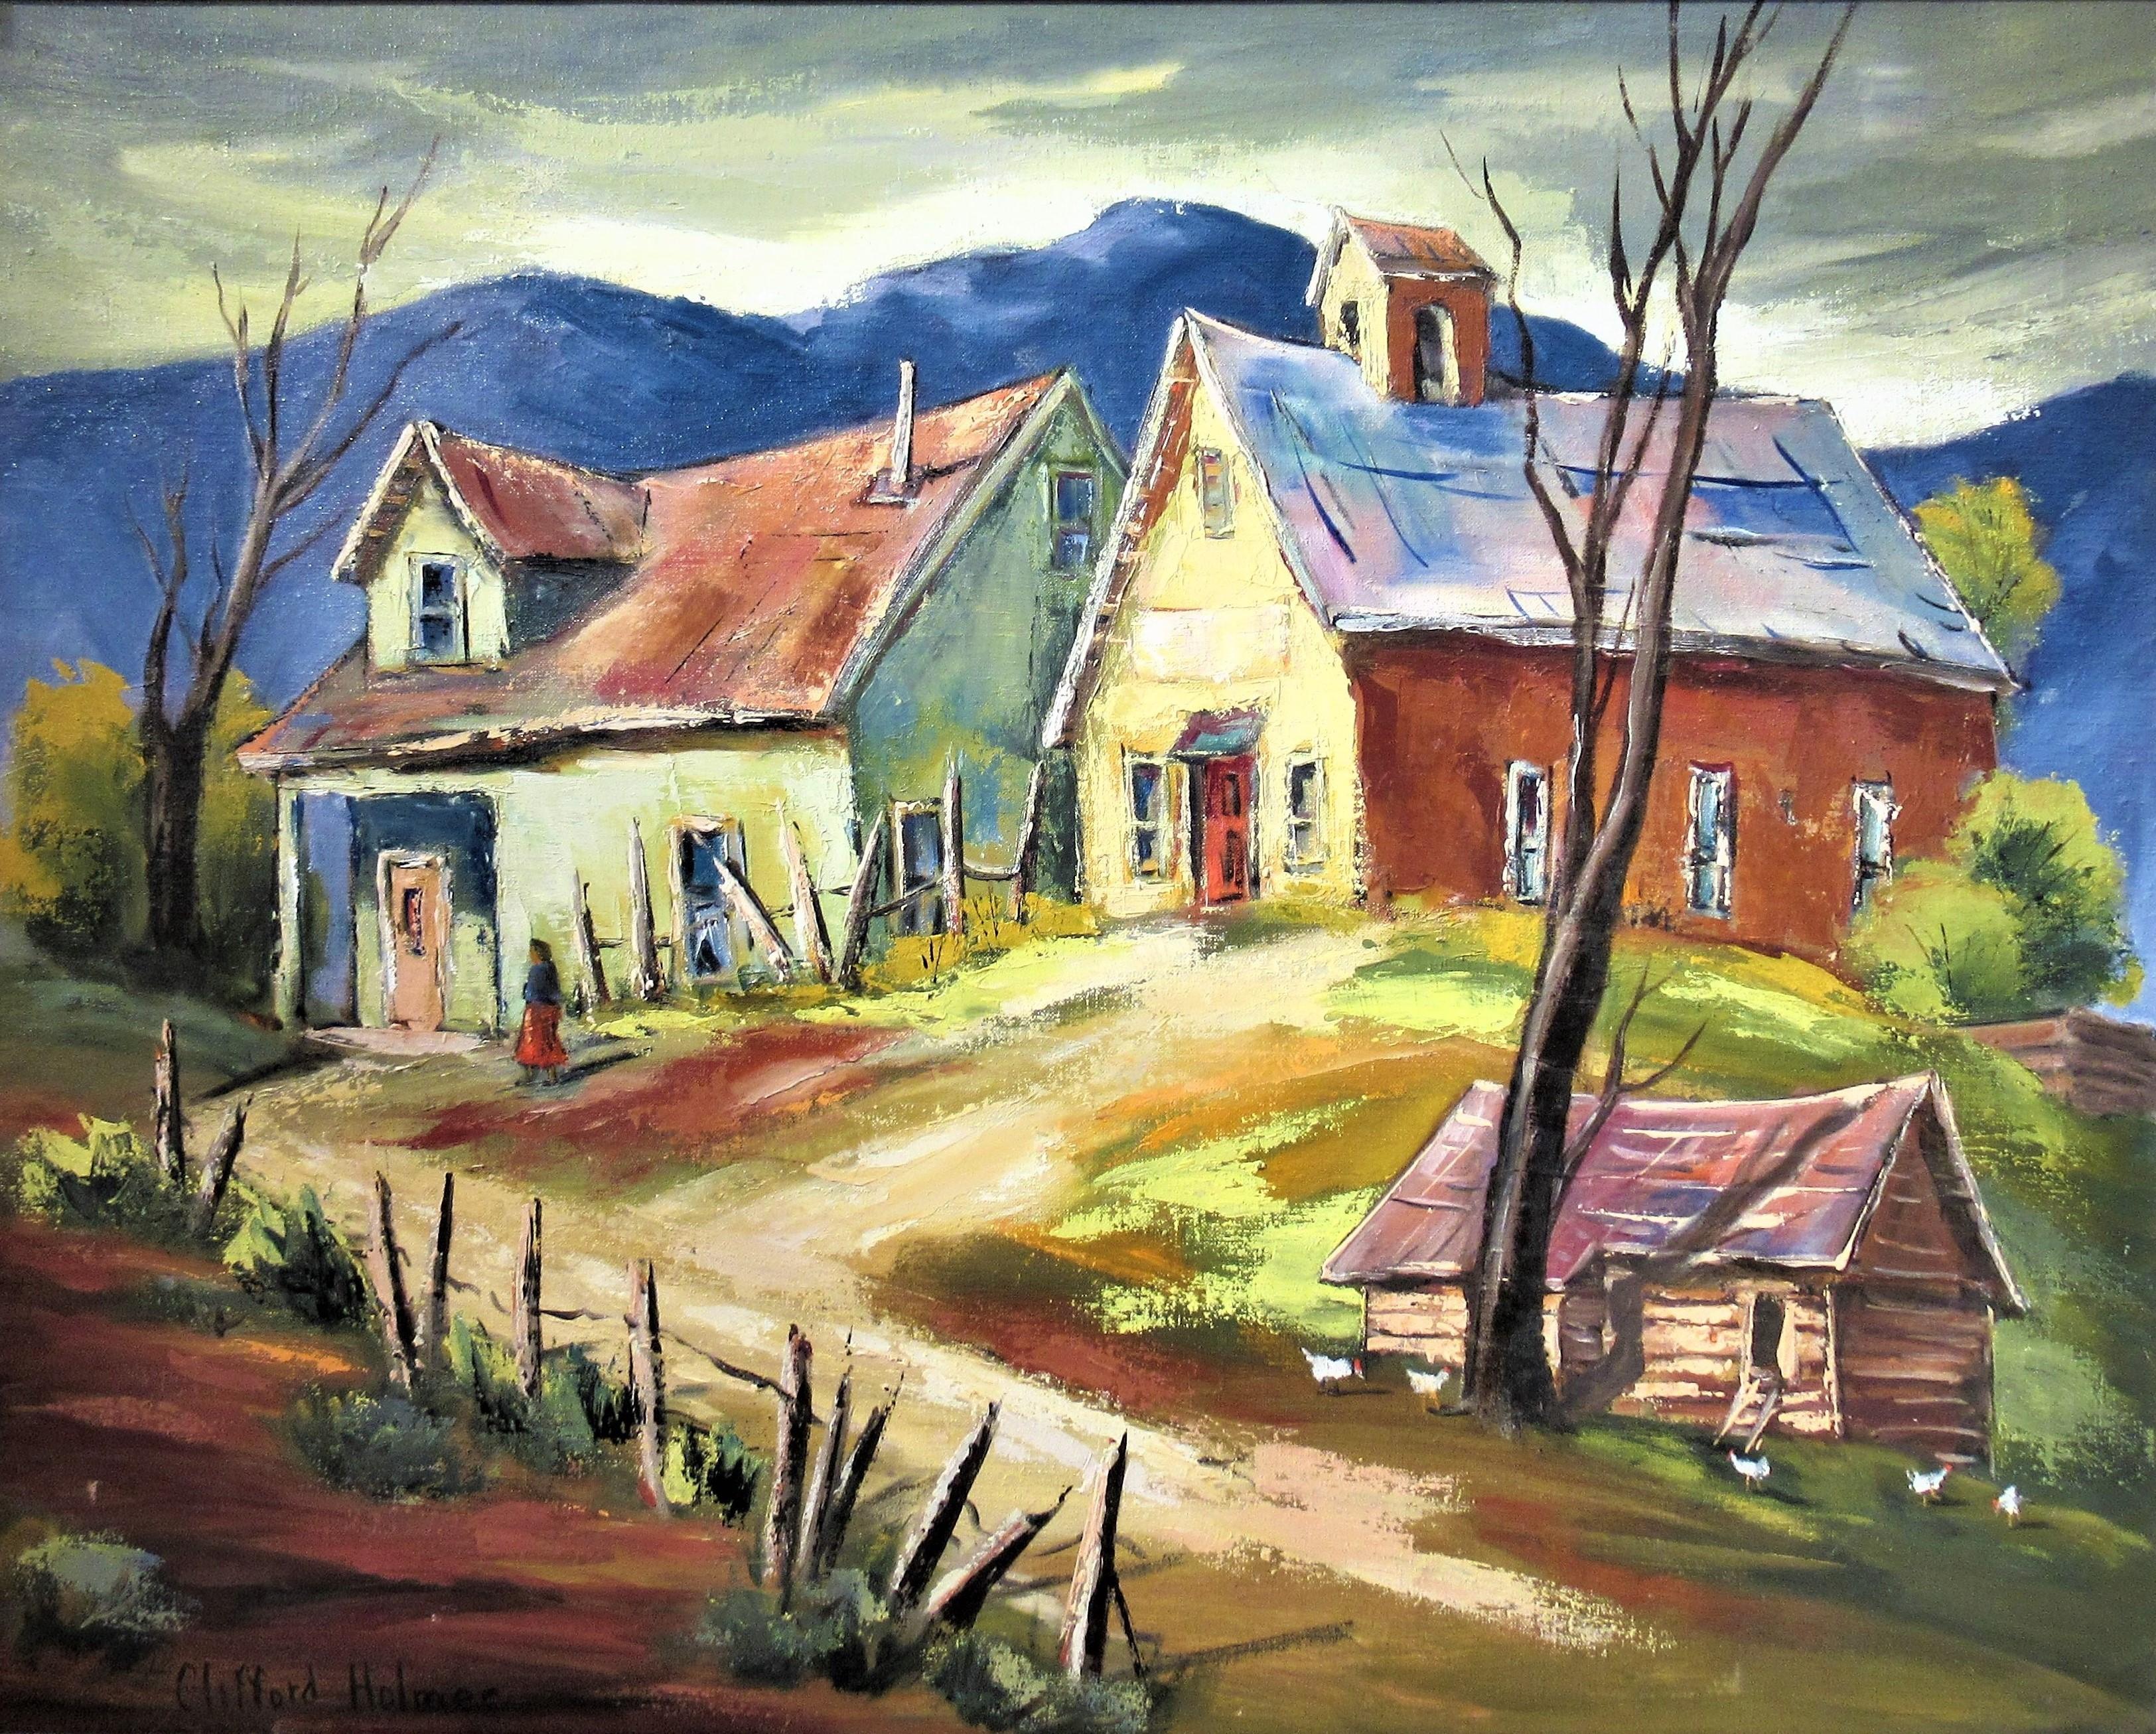 El Vall - Painting by Clifford Holmes